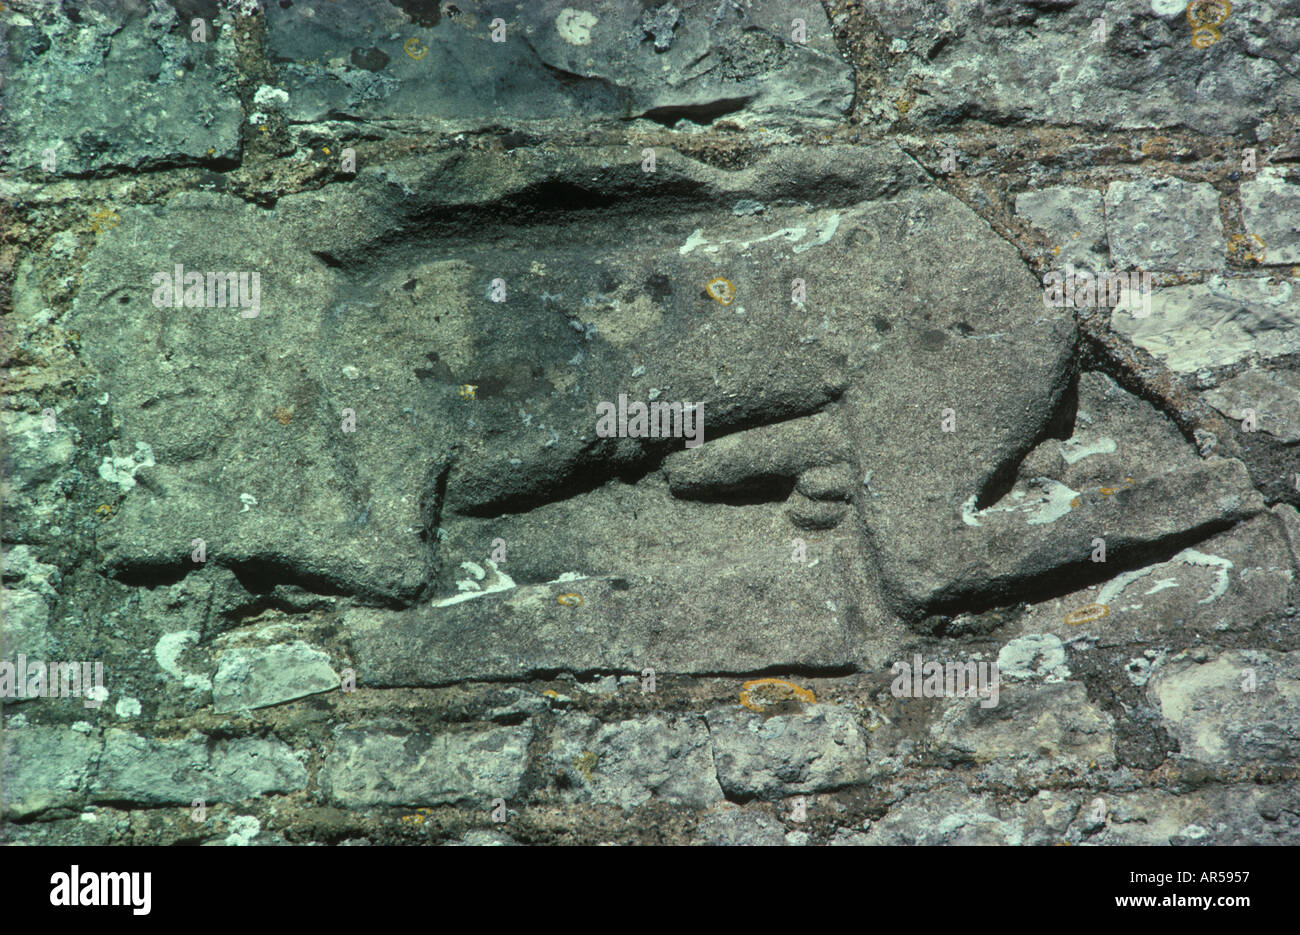 Fertility symbol on exterior wall of 'Church of St James' the 'Great Abson' Somerset England HOMER SYKES Stock Photo